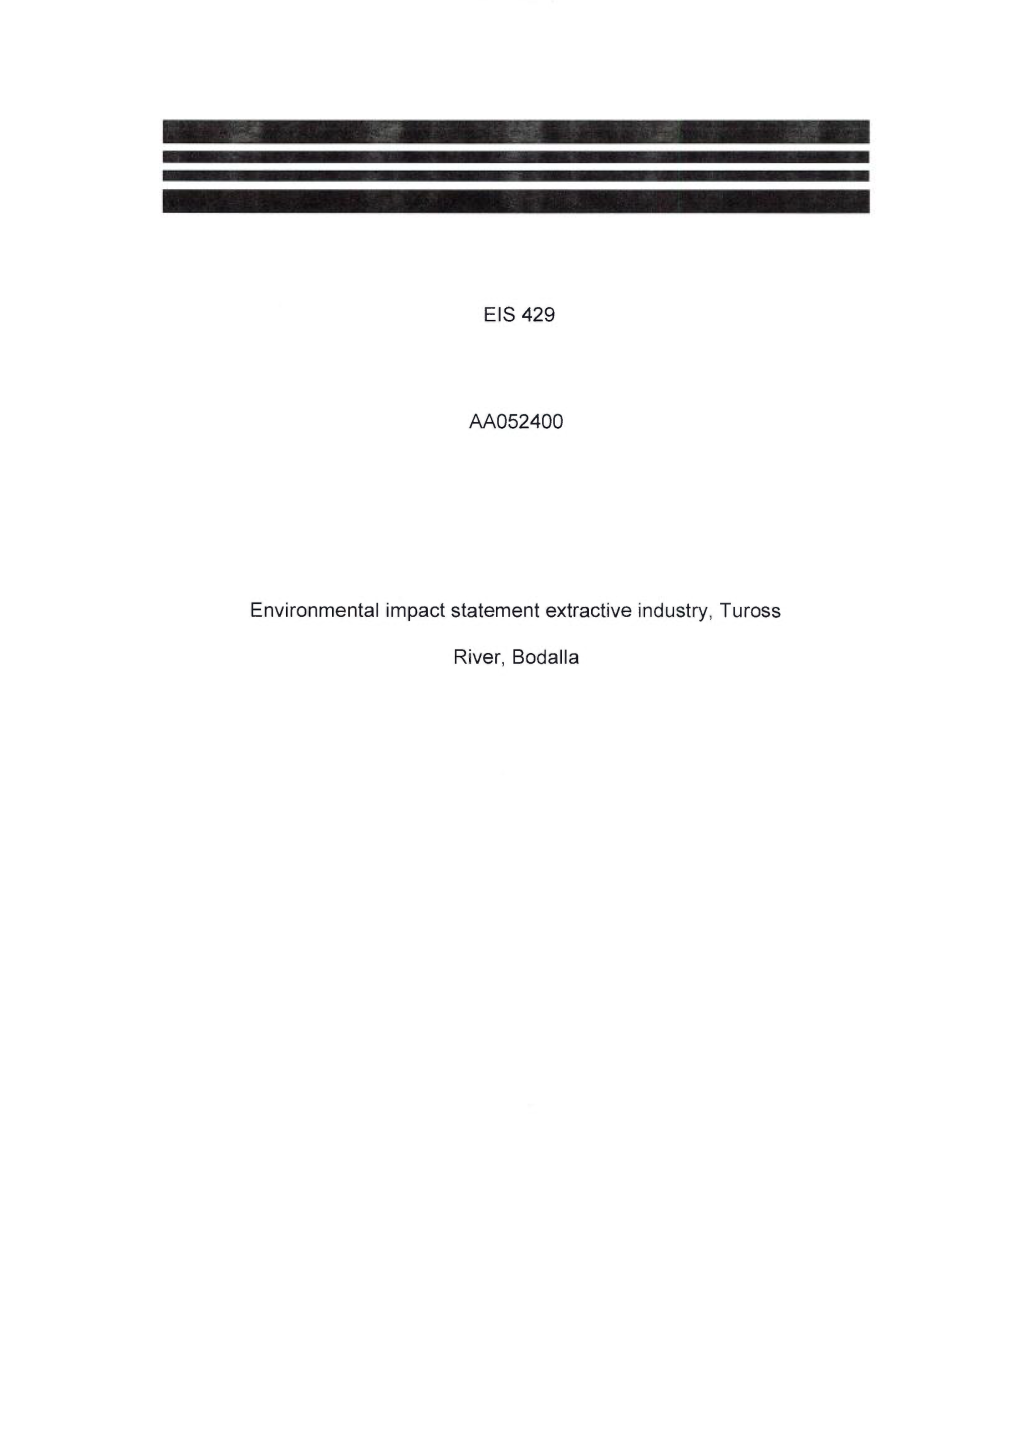 EIS 429 Environmental Impact Statement Extractive Industry